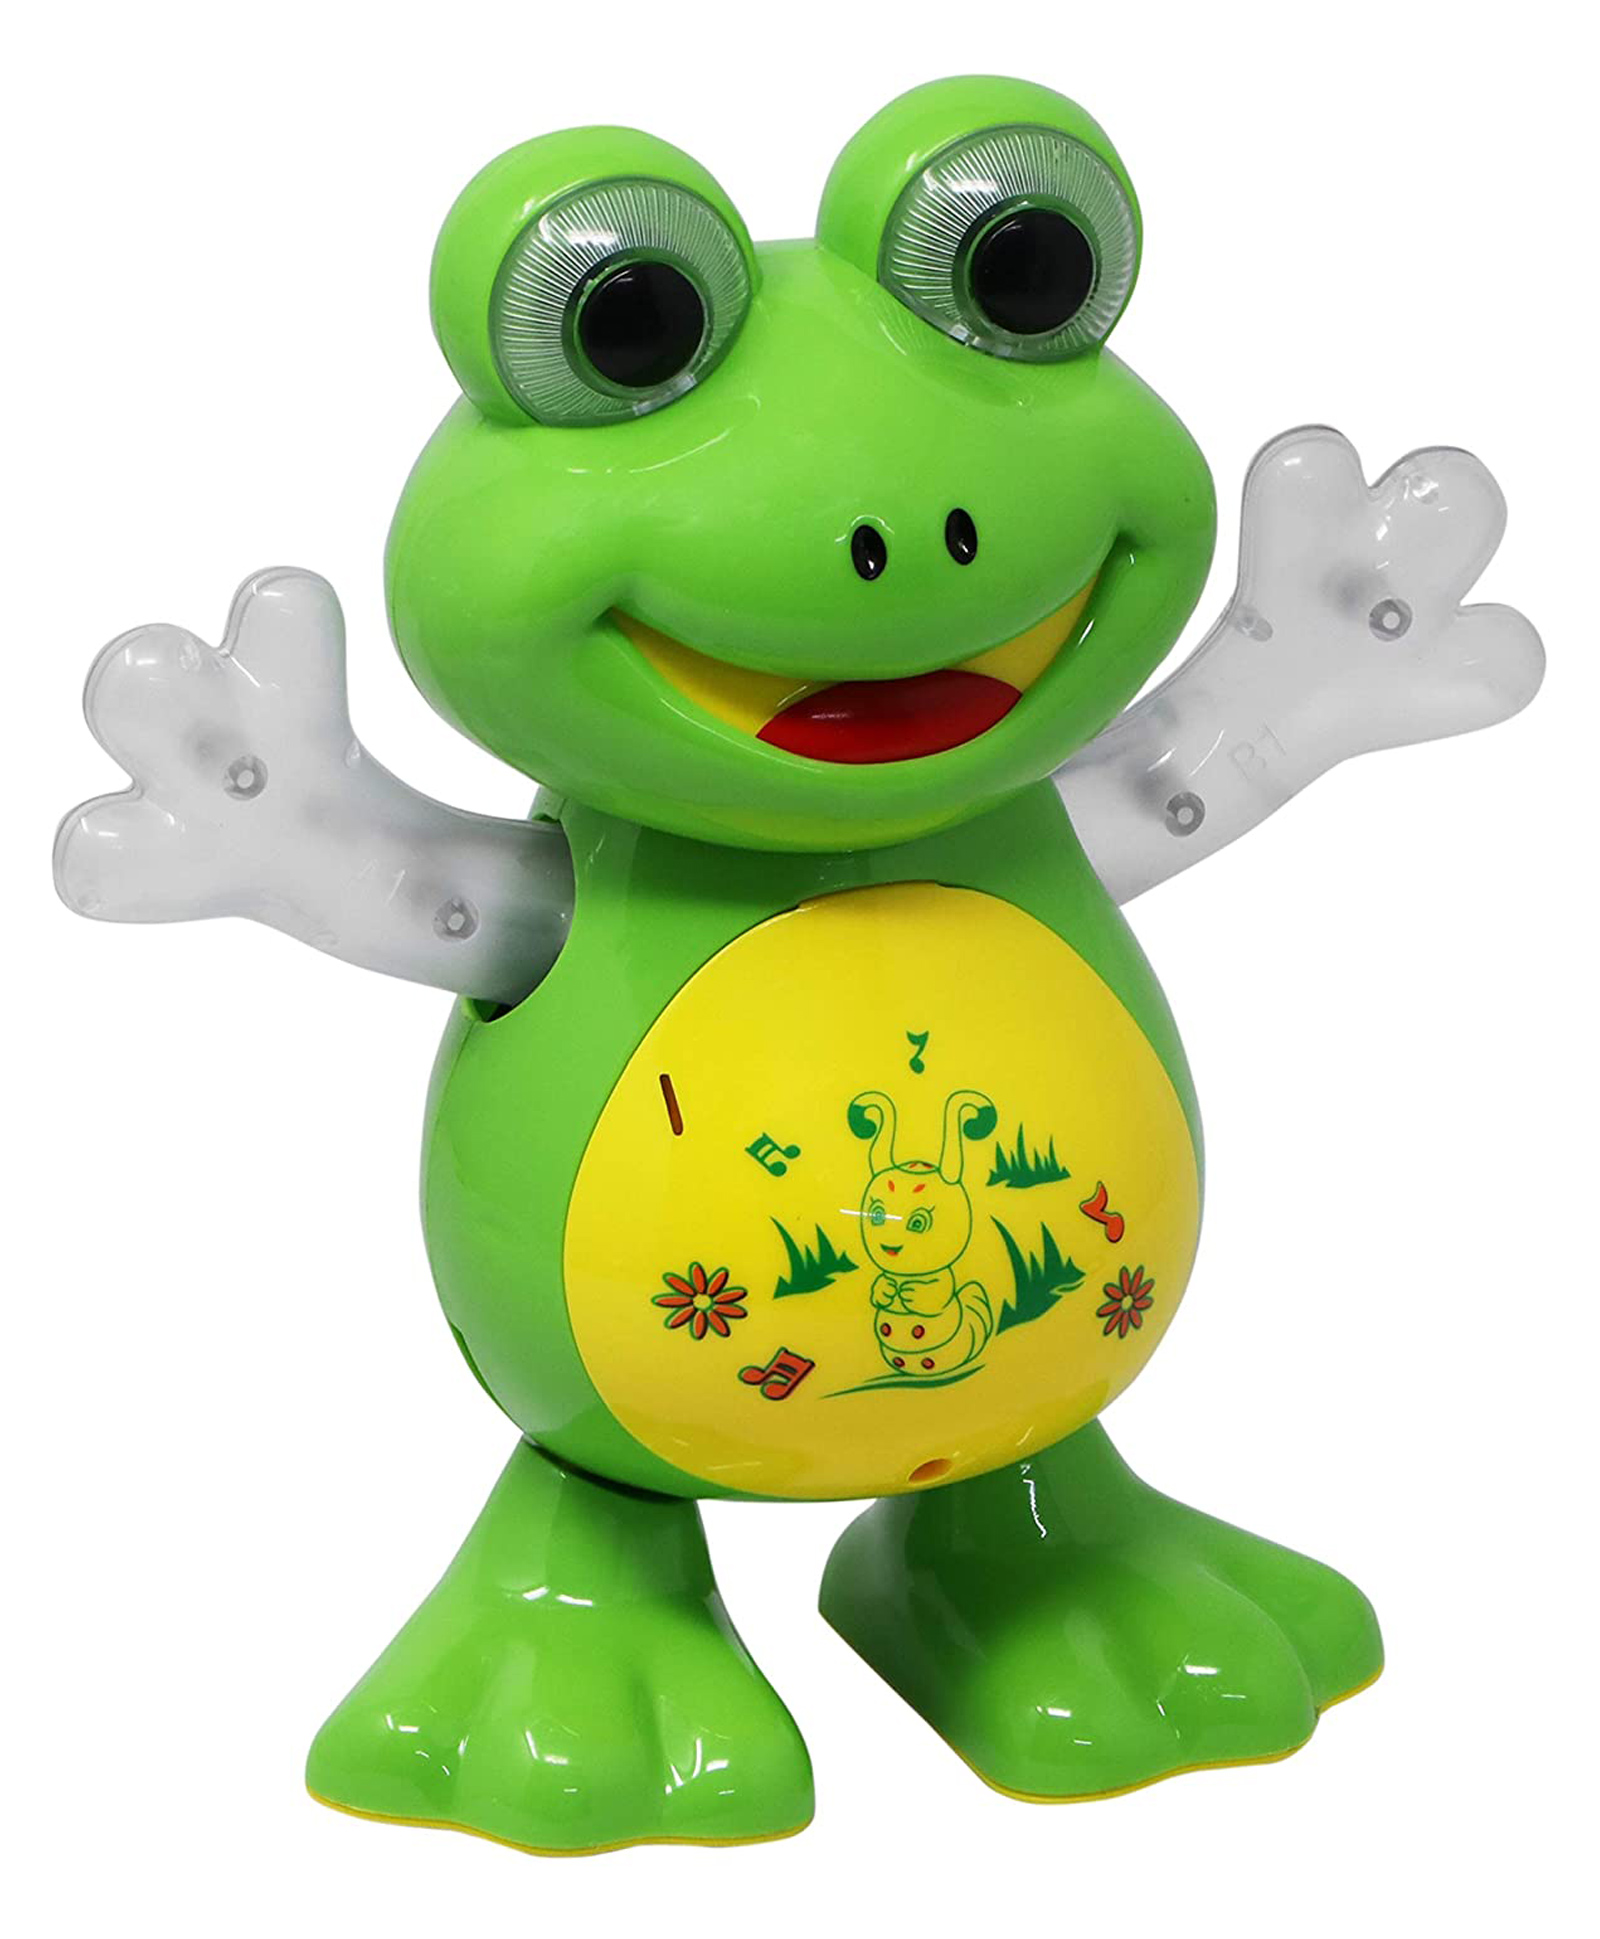 Yamama Musical Dancing Frog with Vibrant Lightening & Musical Sound Effects  Toy for Kids - Green Online India, Buy Musical Toys for (2-8 Years) at   - 12299456